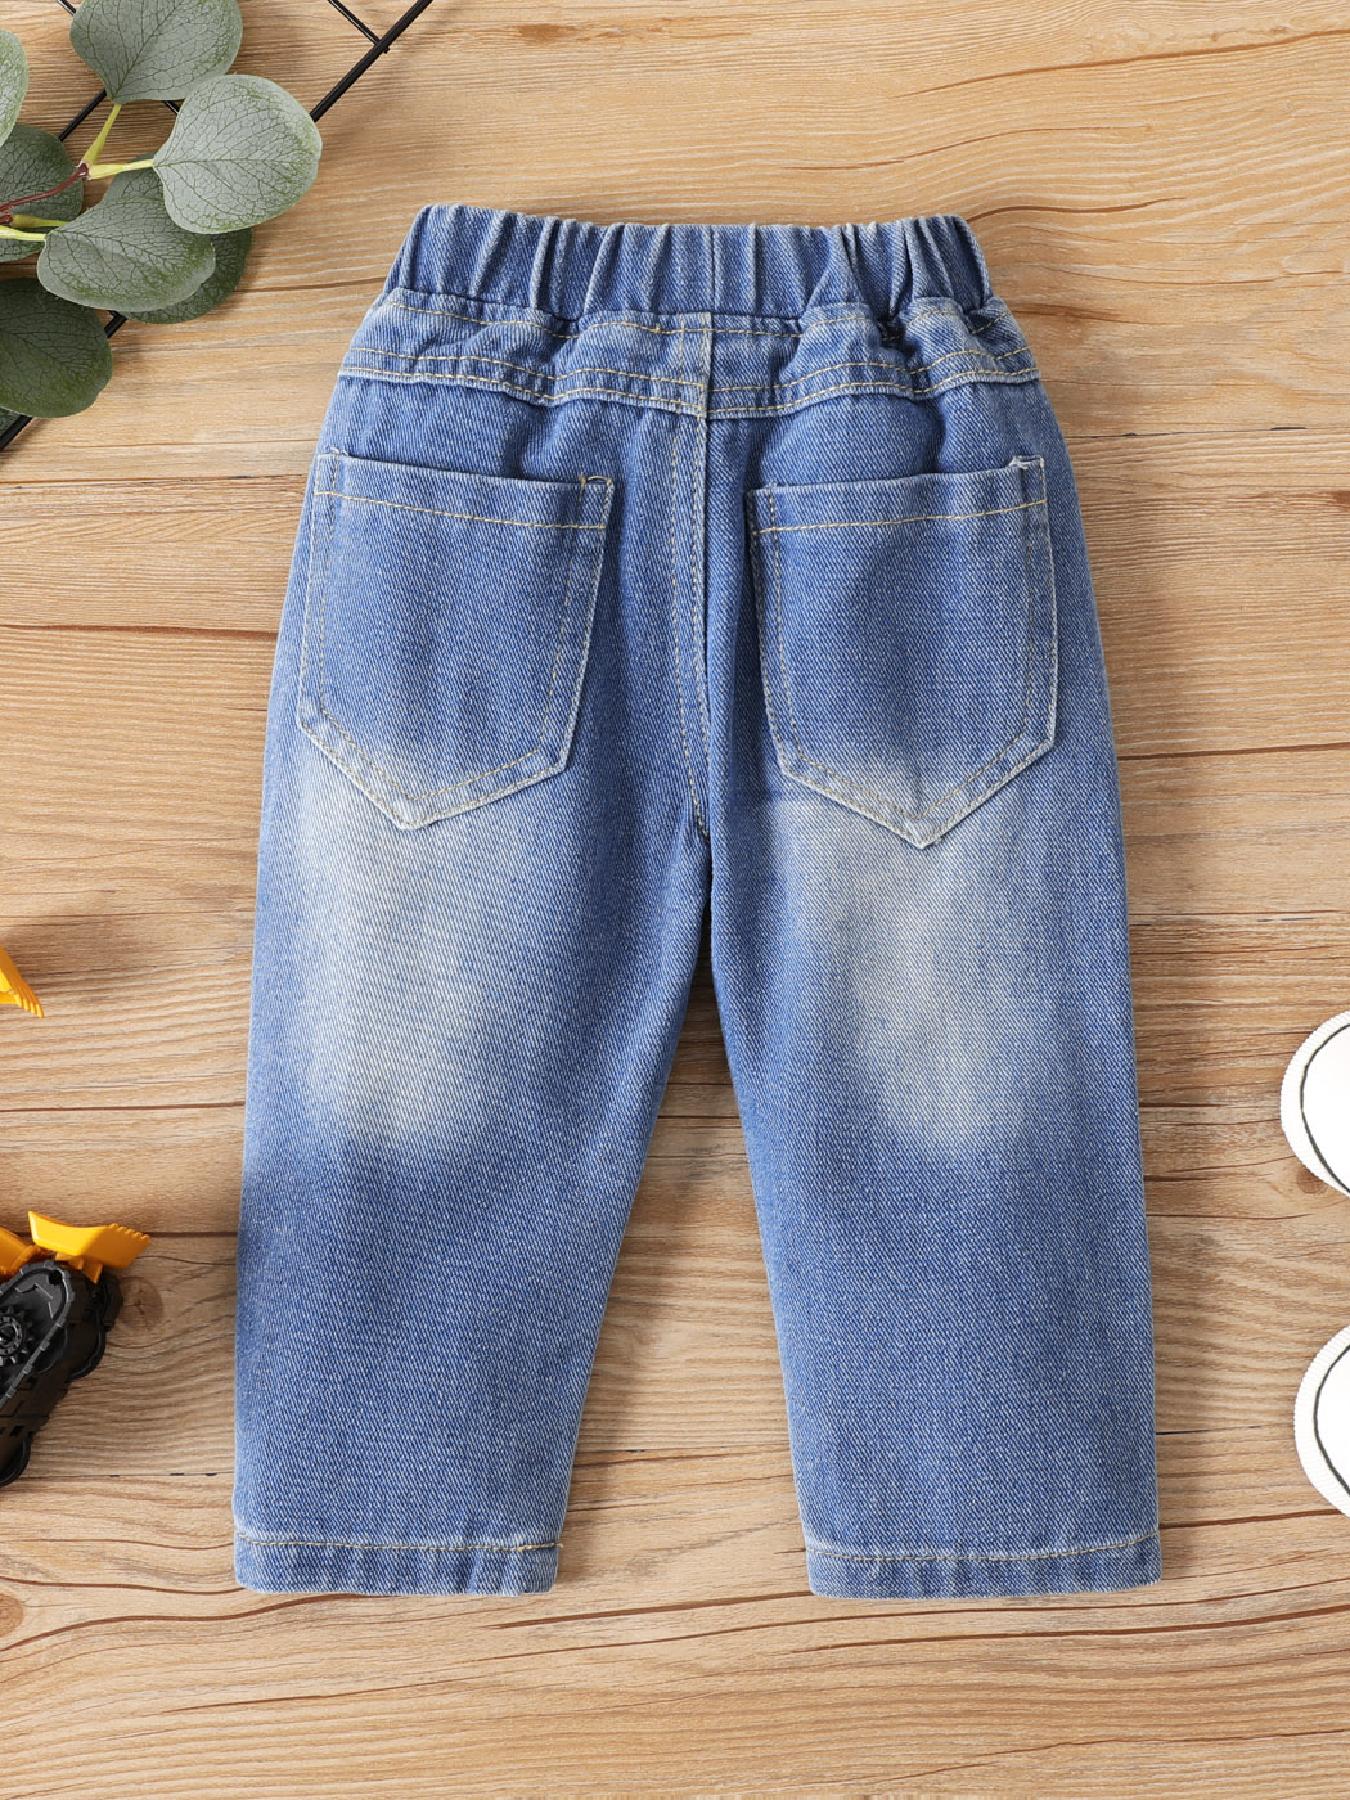 Baby Boy Ripped Jeans, Distressed Toddler Jeans, Unisex Boys Girls Jeans,  Denim Baby Pants, Cute Denim Jeans, Sized 1-2, 2-3, 3-4 Years UK 